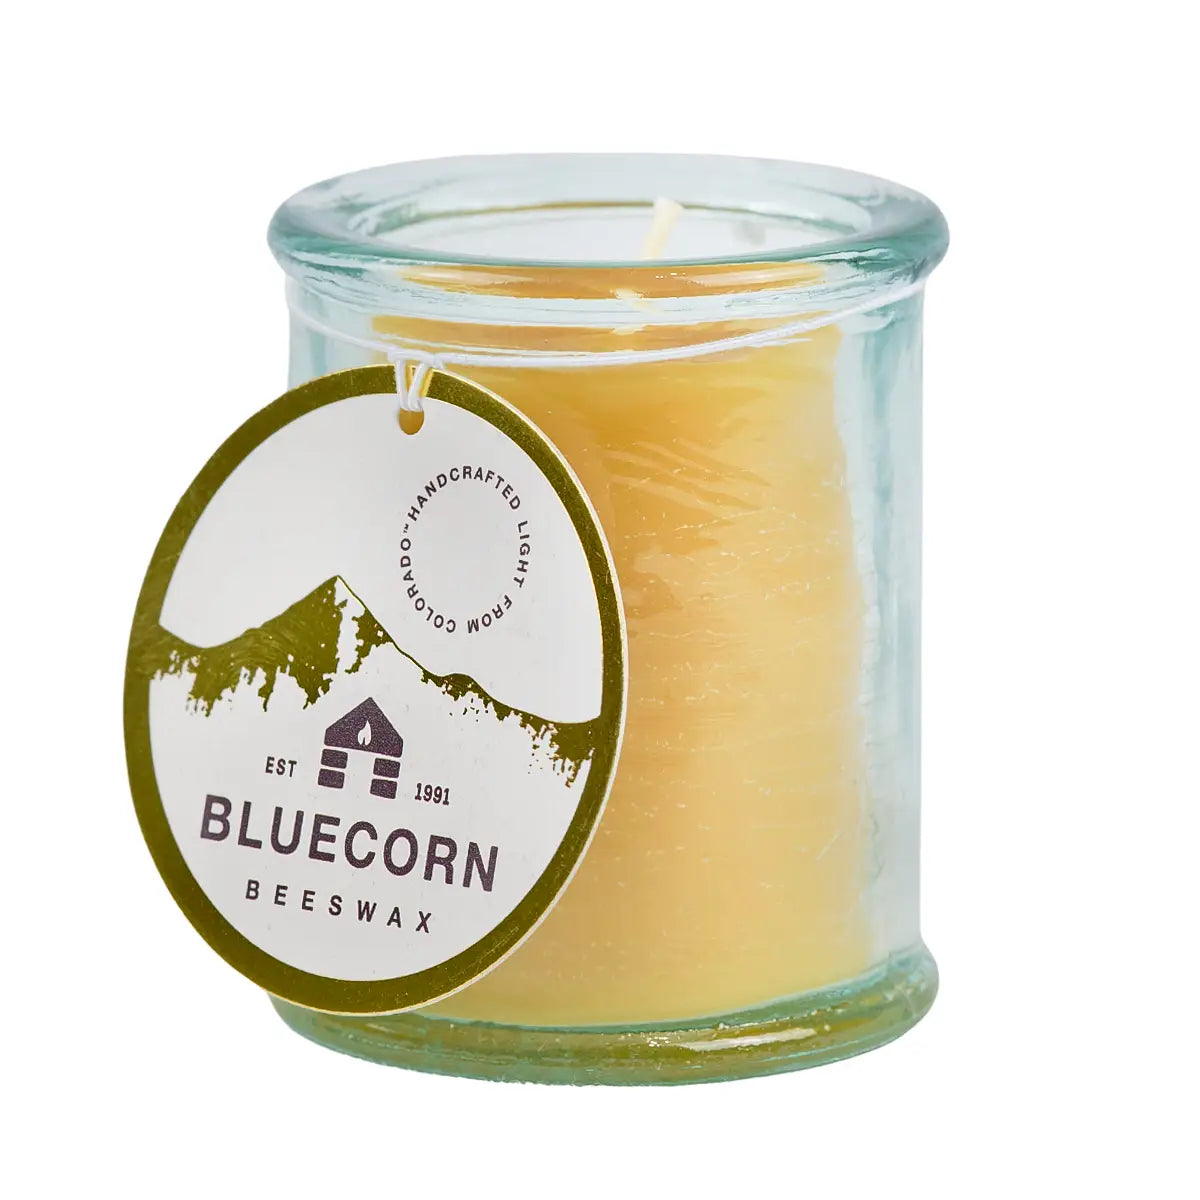 Bluecorn Beeswax Spanish 3-Wick Pure Beeswax Candle - 100% Recycled Glass